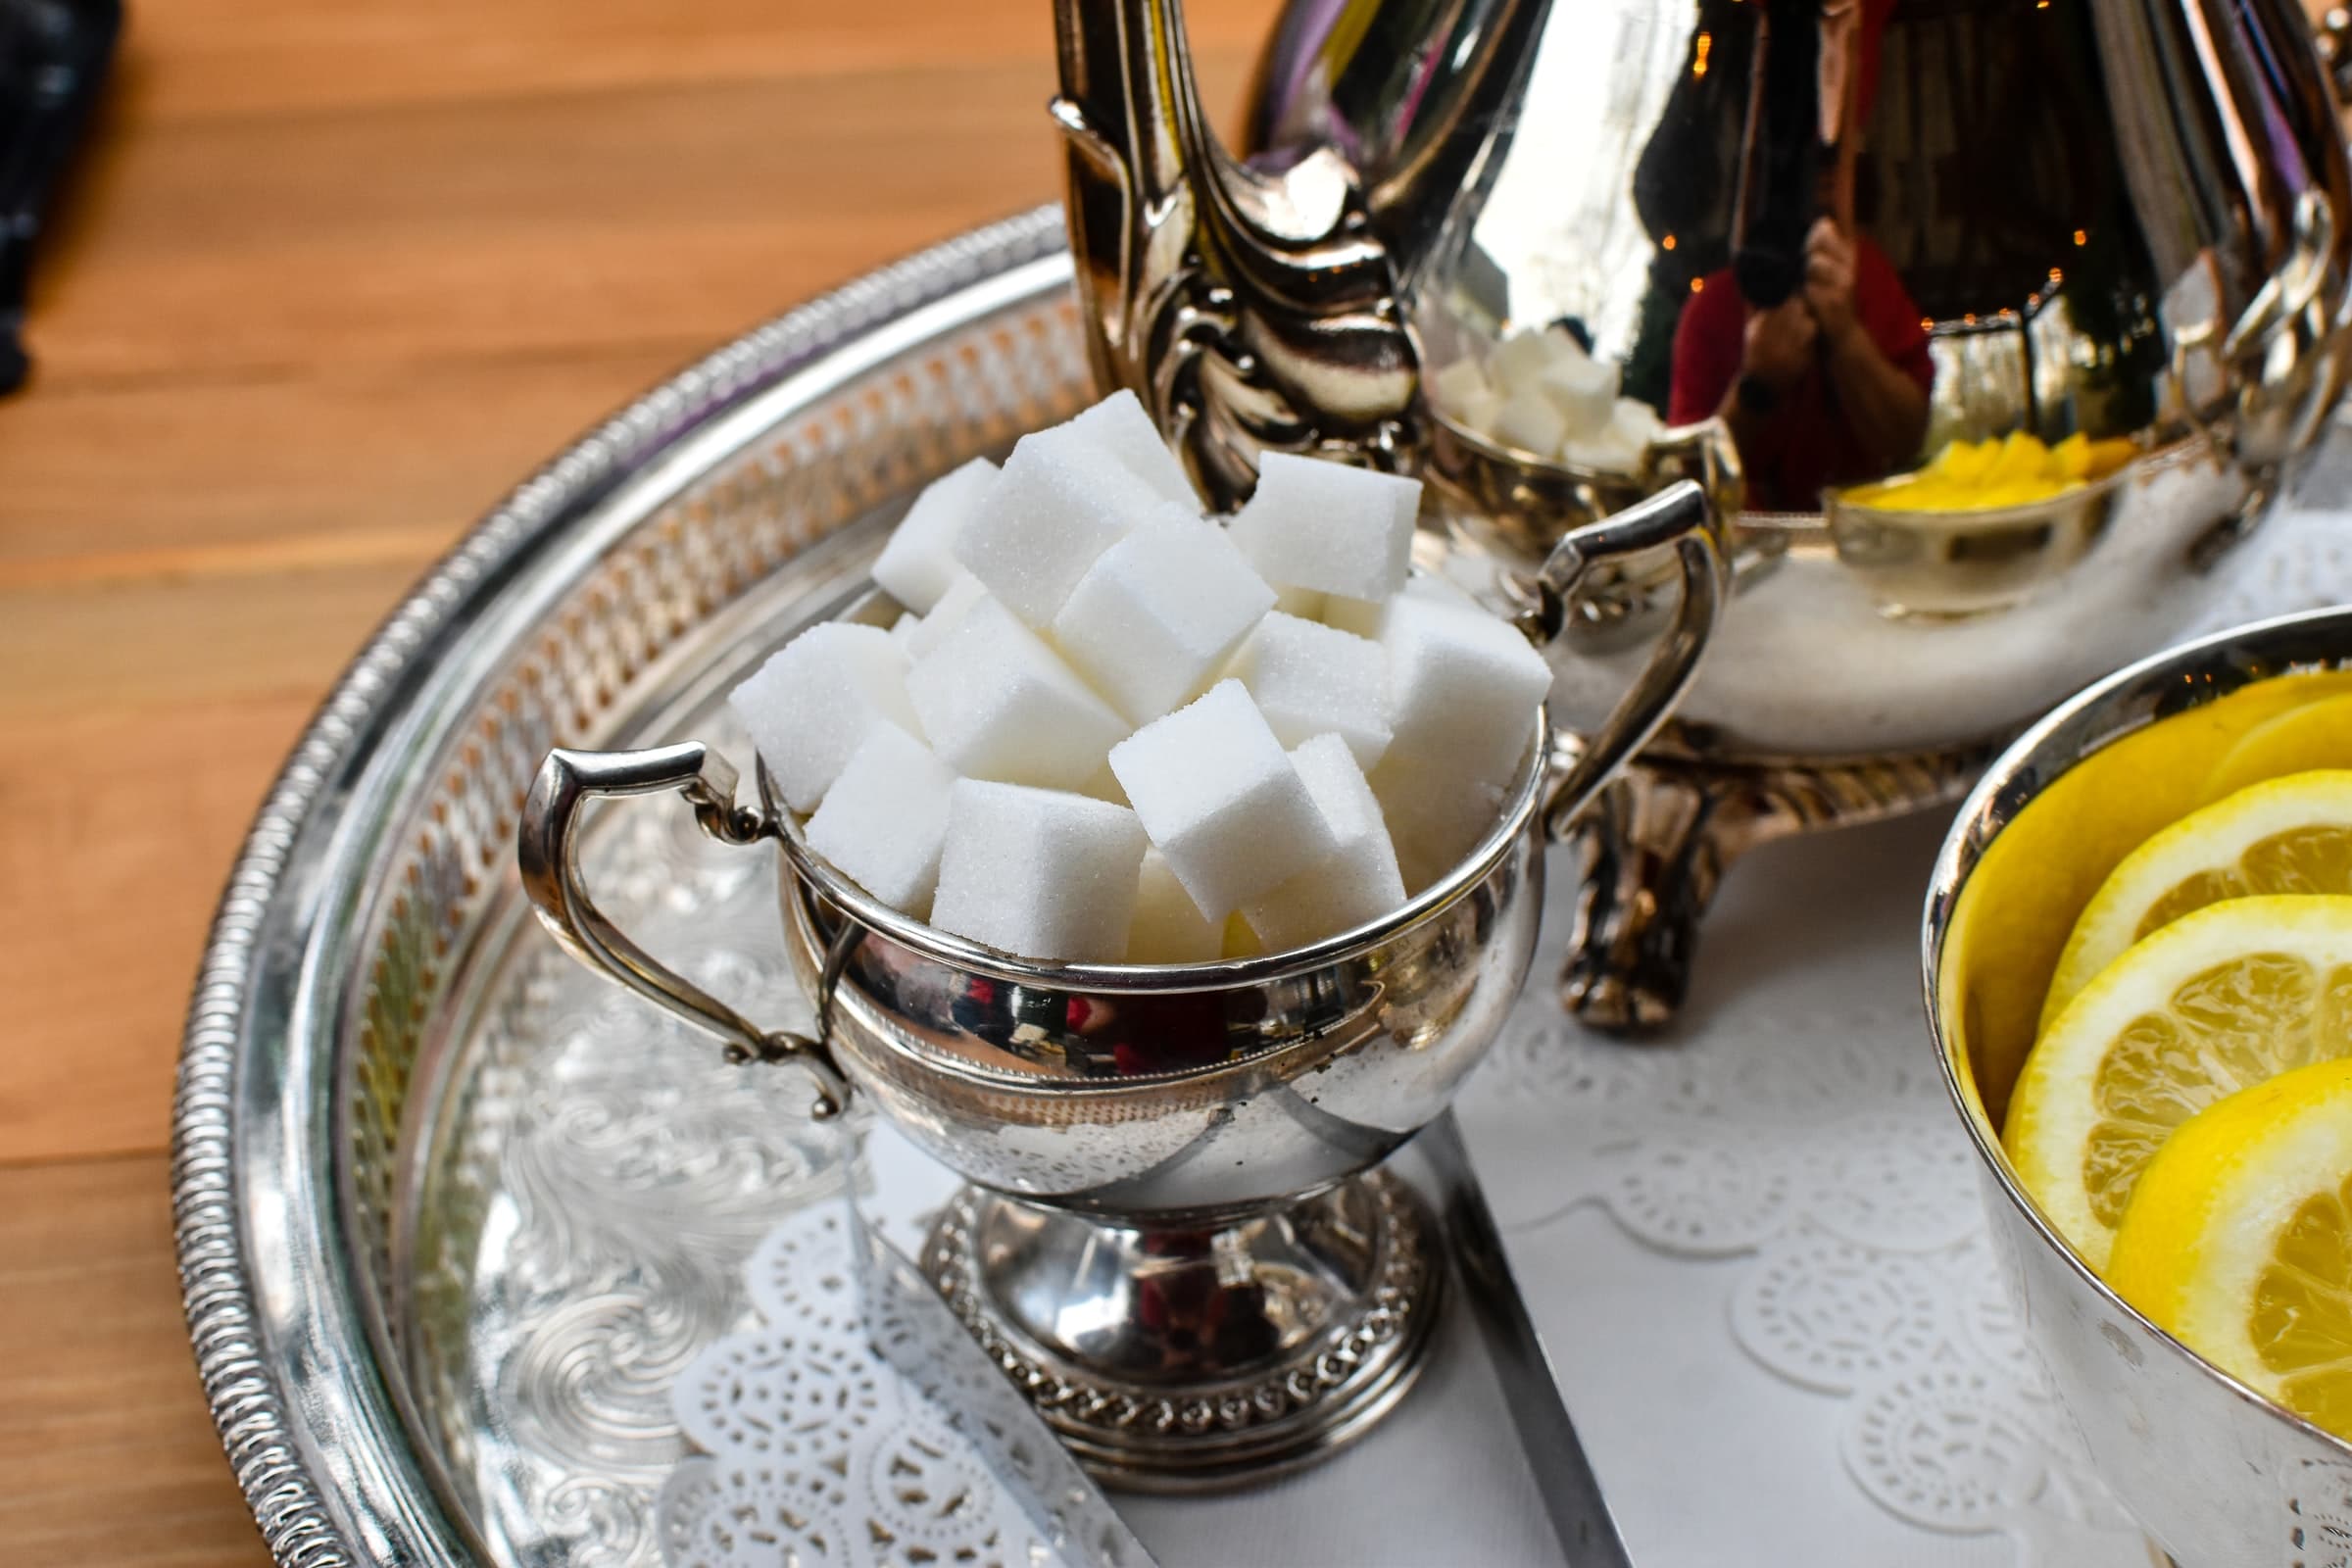 Sugar cubes in a dish on silver tray